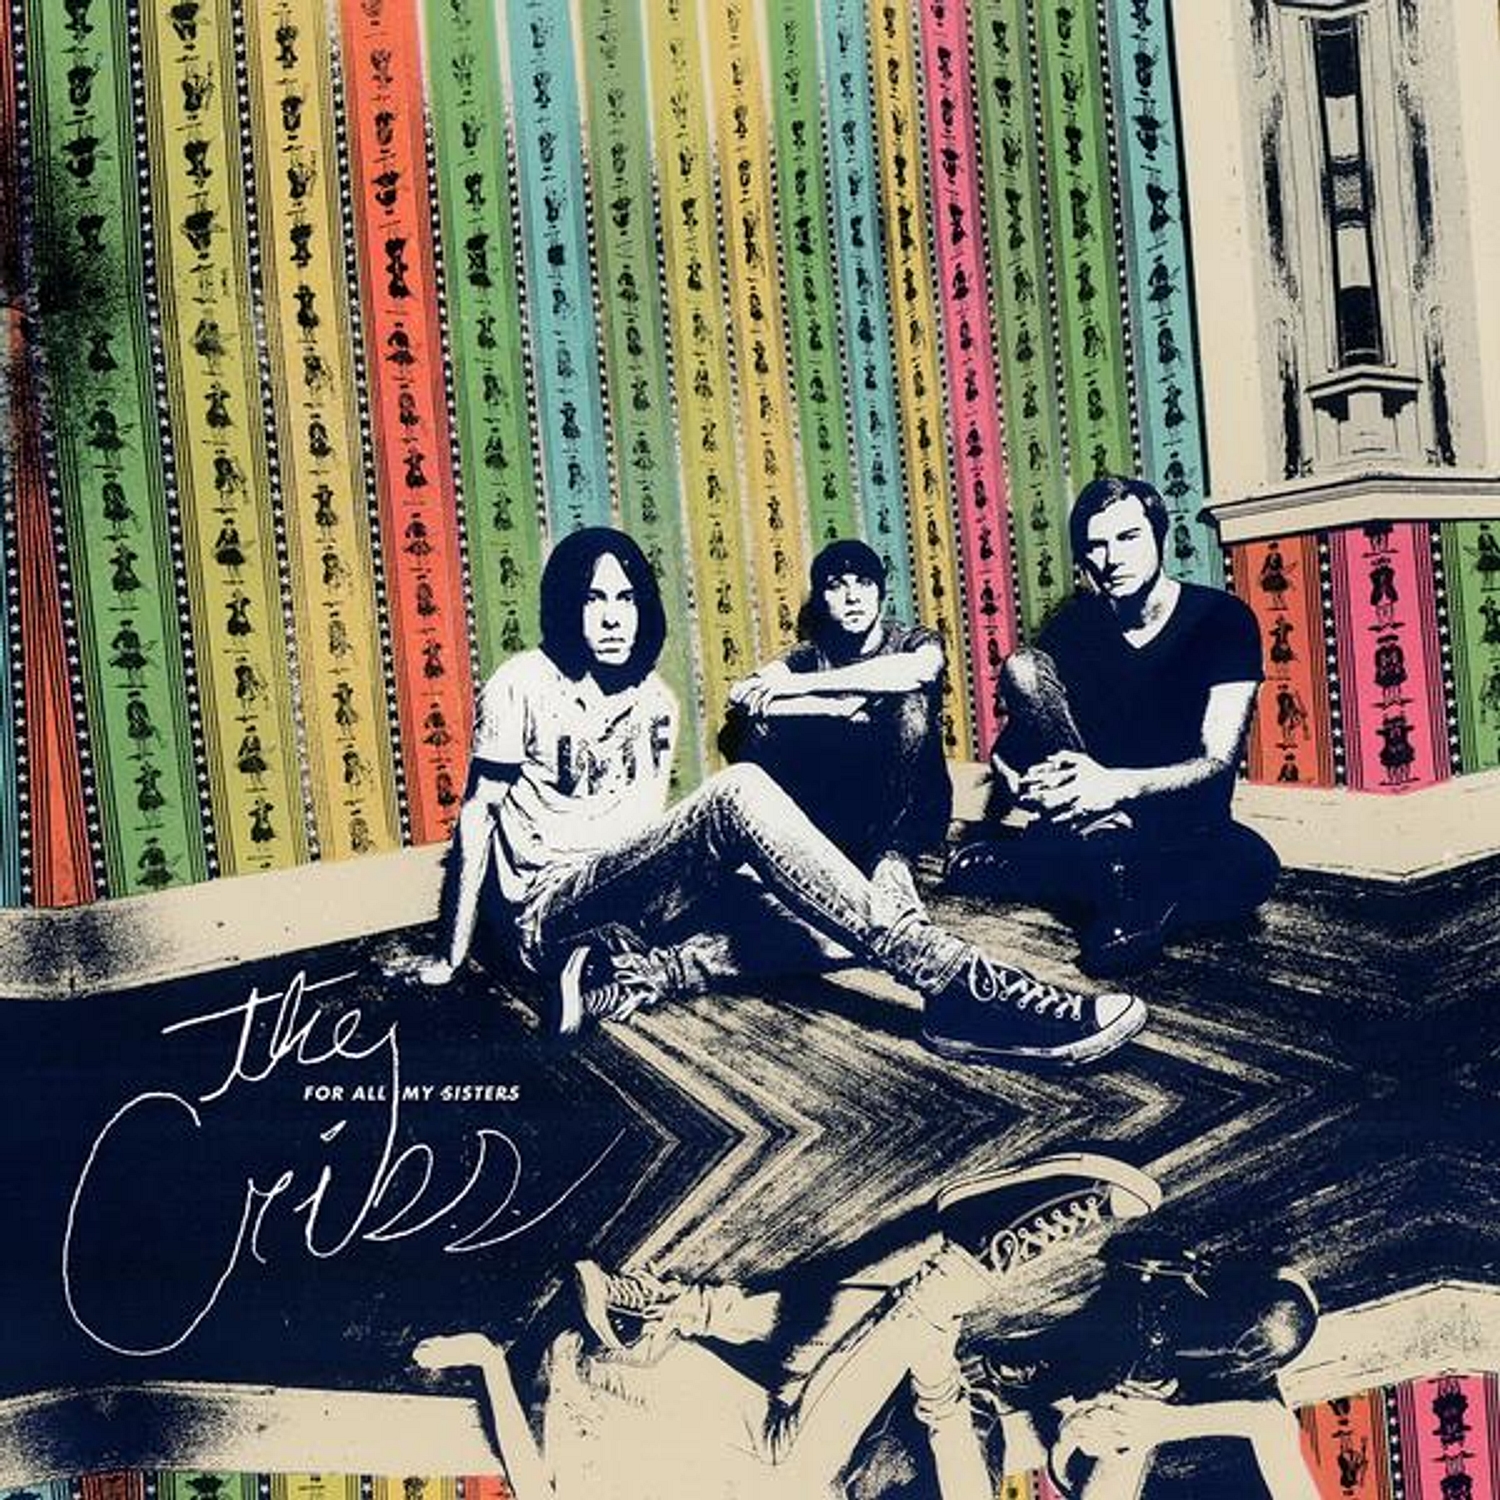 The Cribs announce new album, stream lead track 'An Ivory Hand'